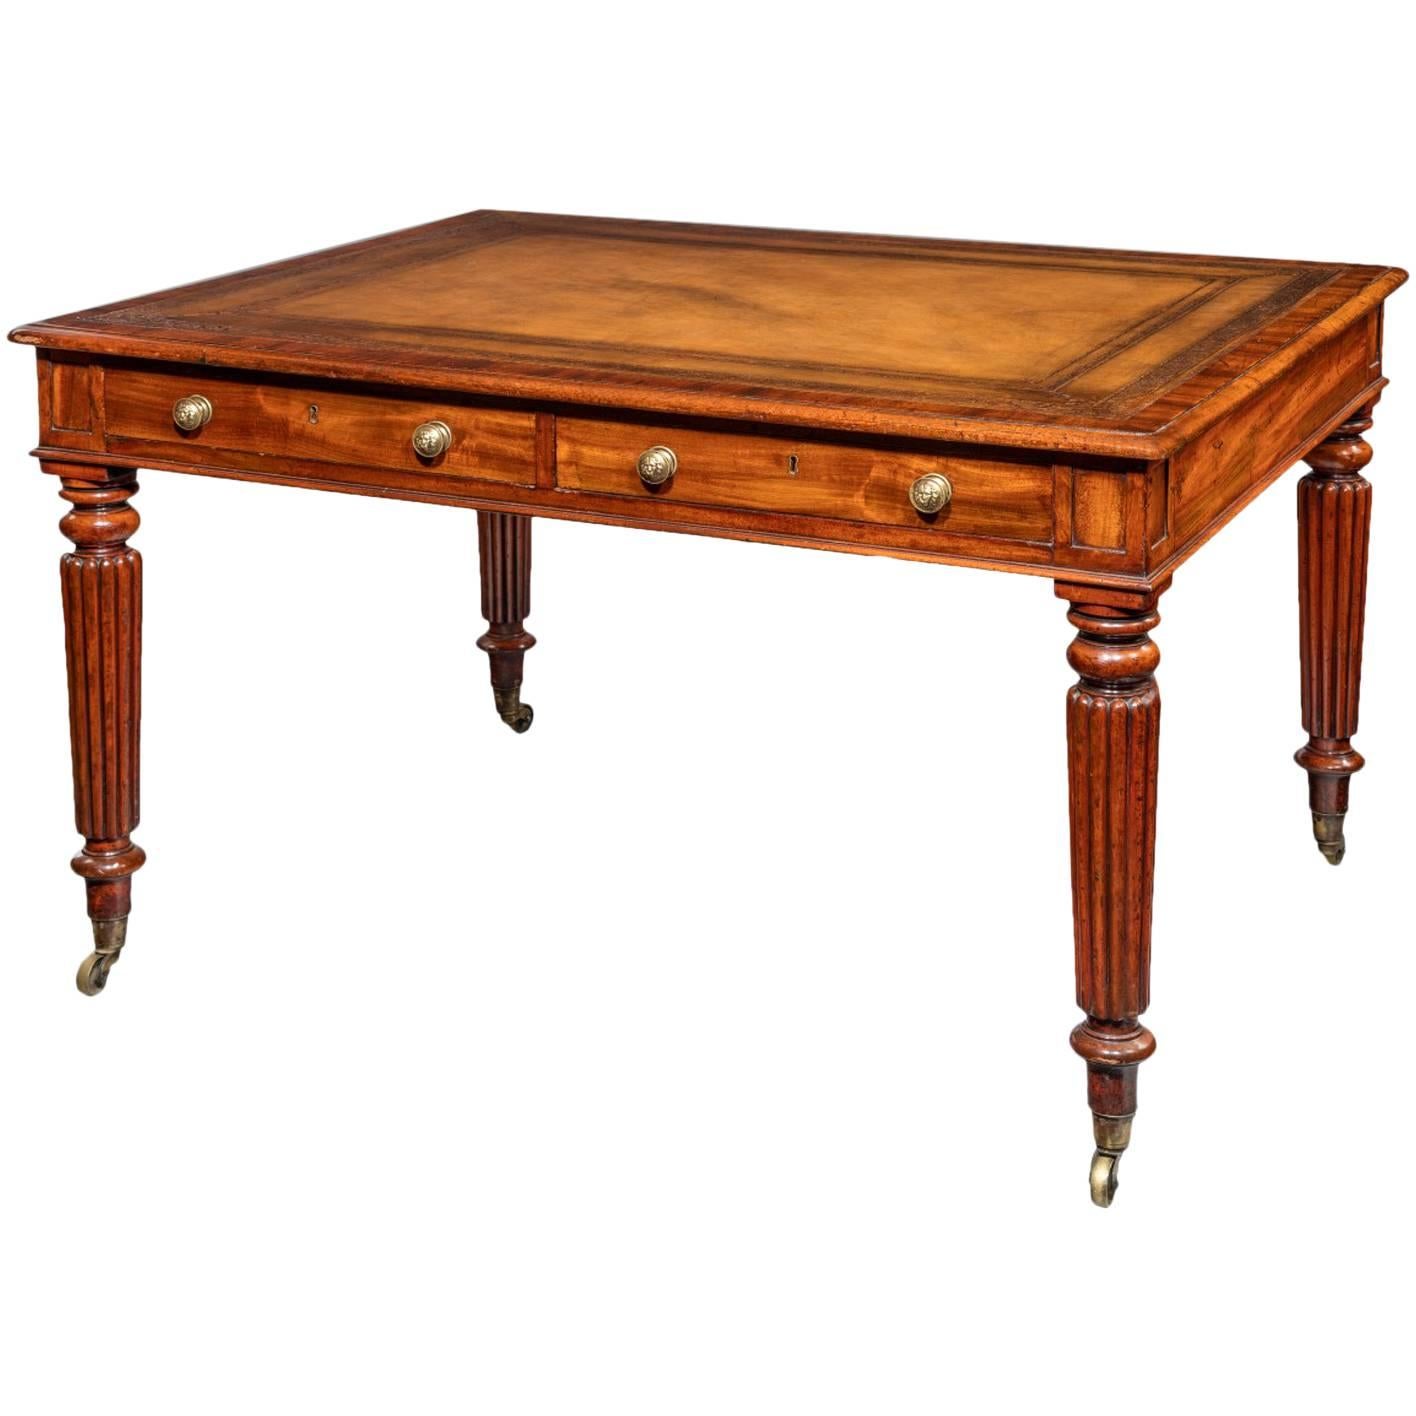 Regency Period Writing Table Attributed to Gillow